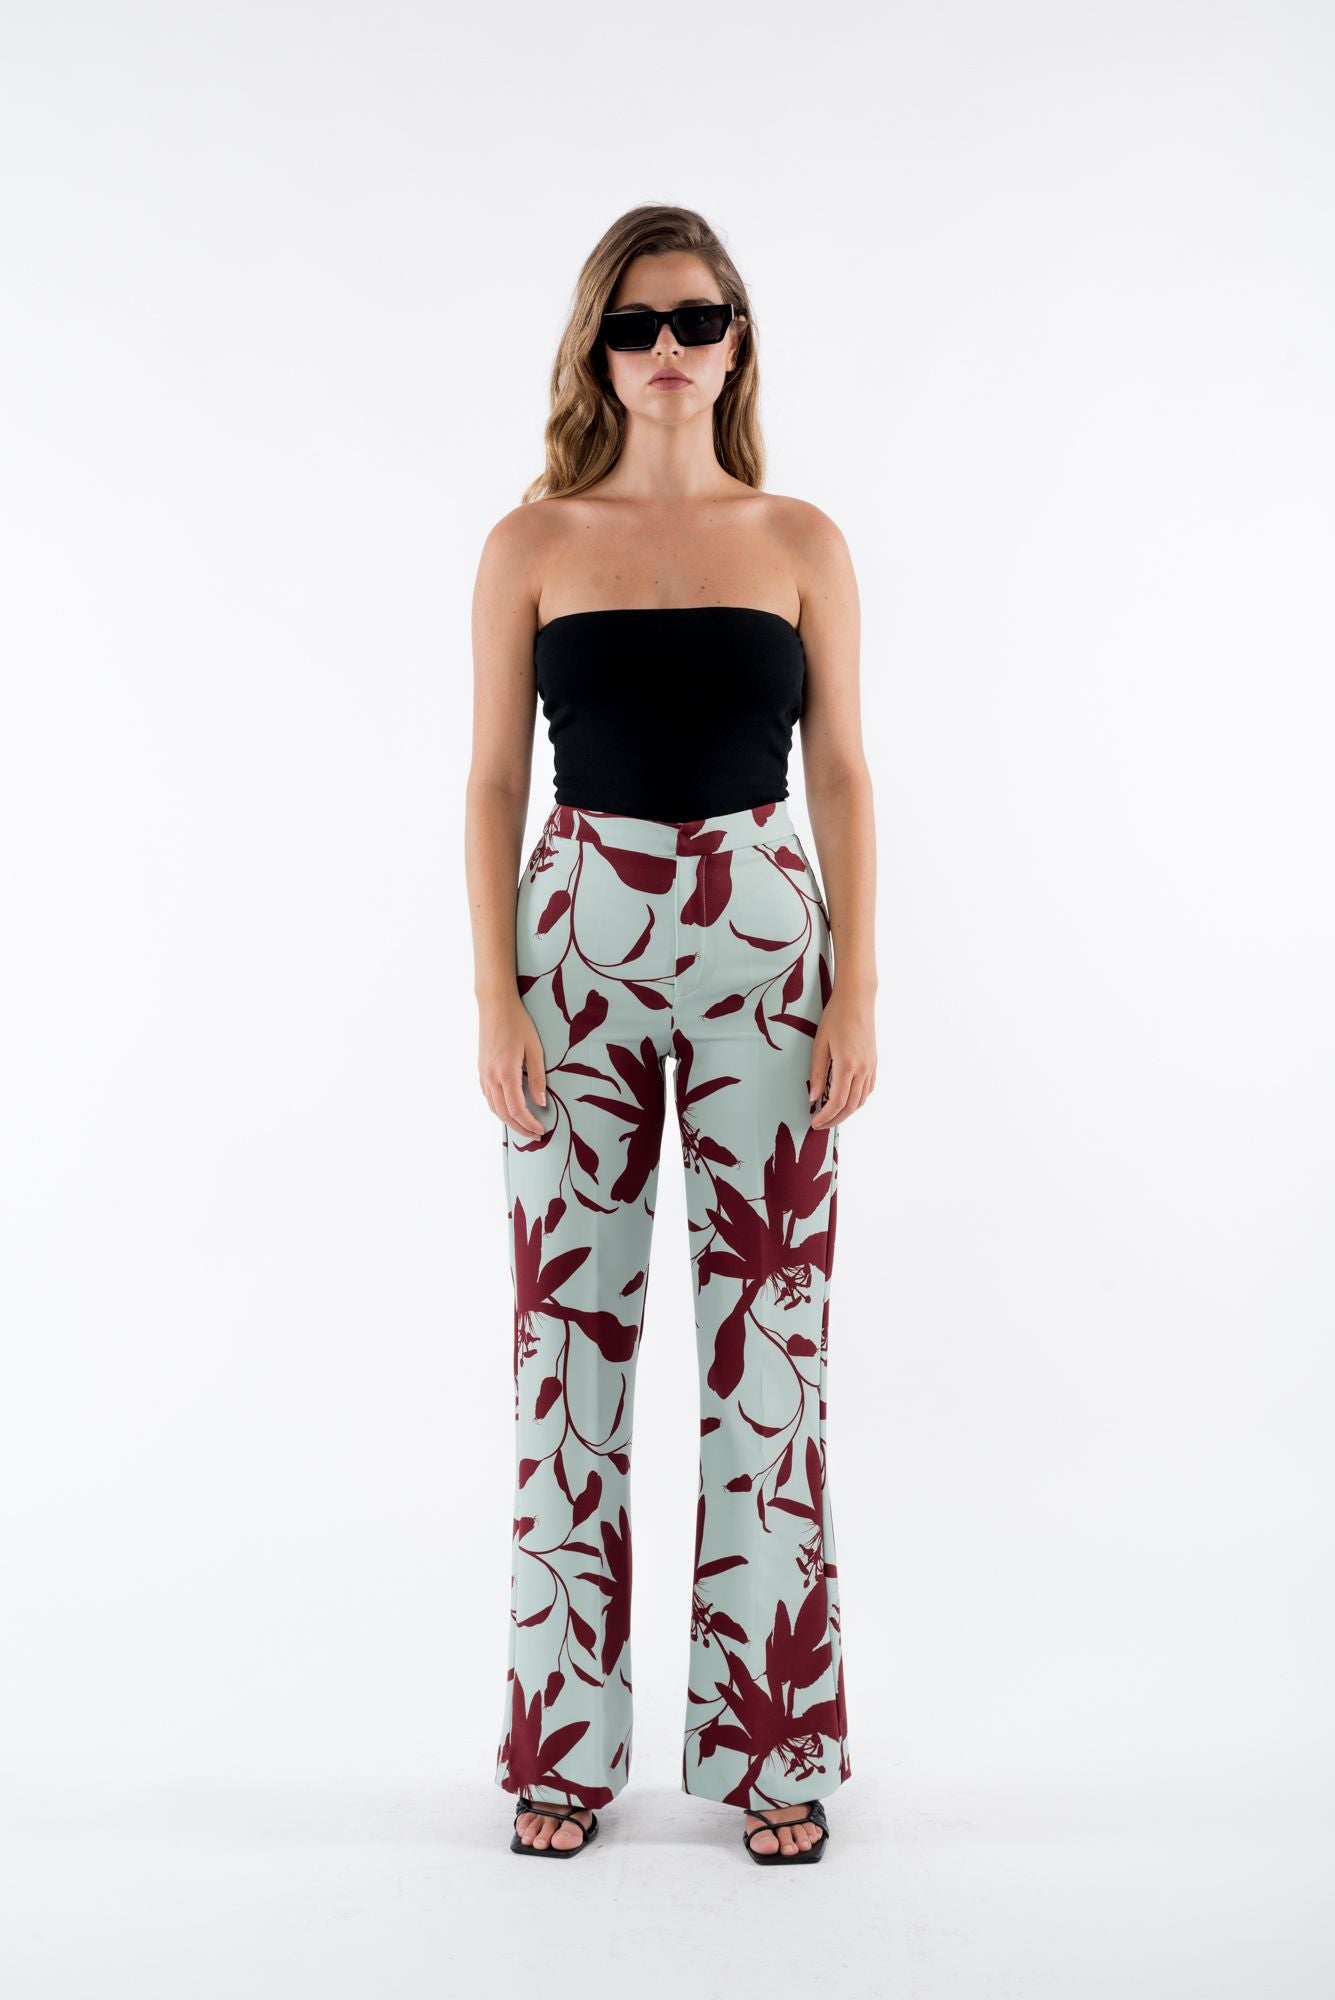 pantalones-other-brand-floral-casual-p-damas